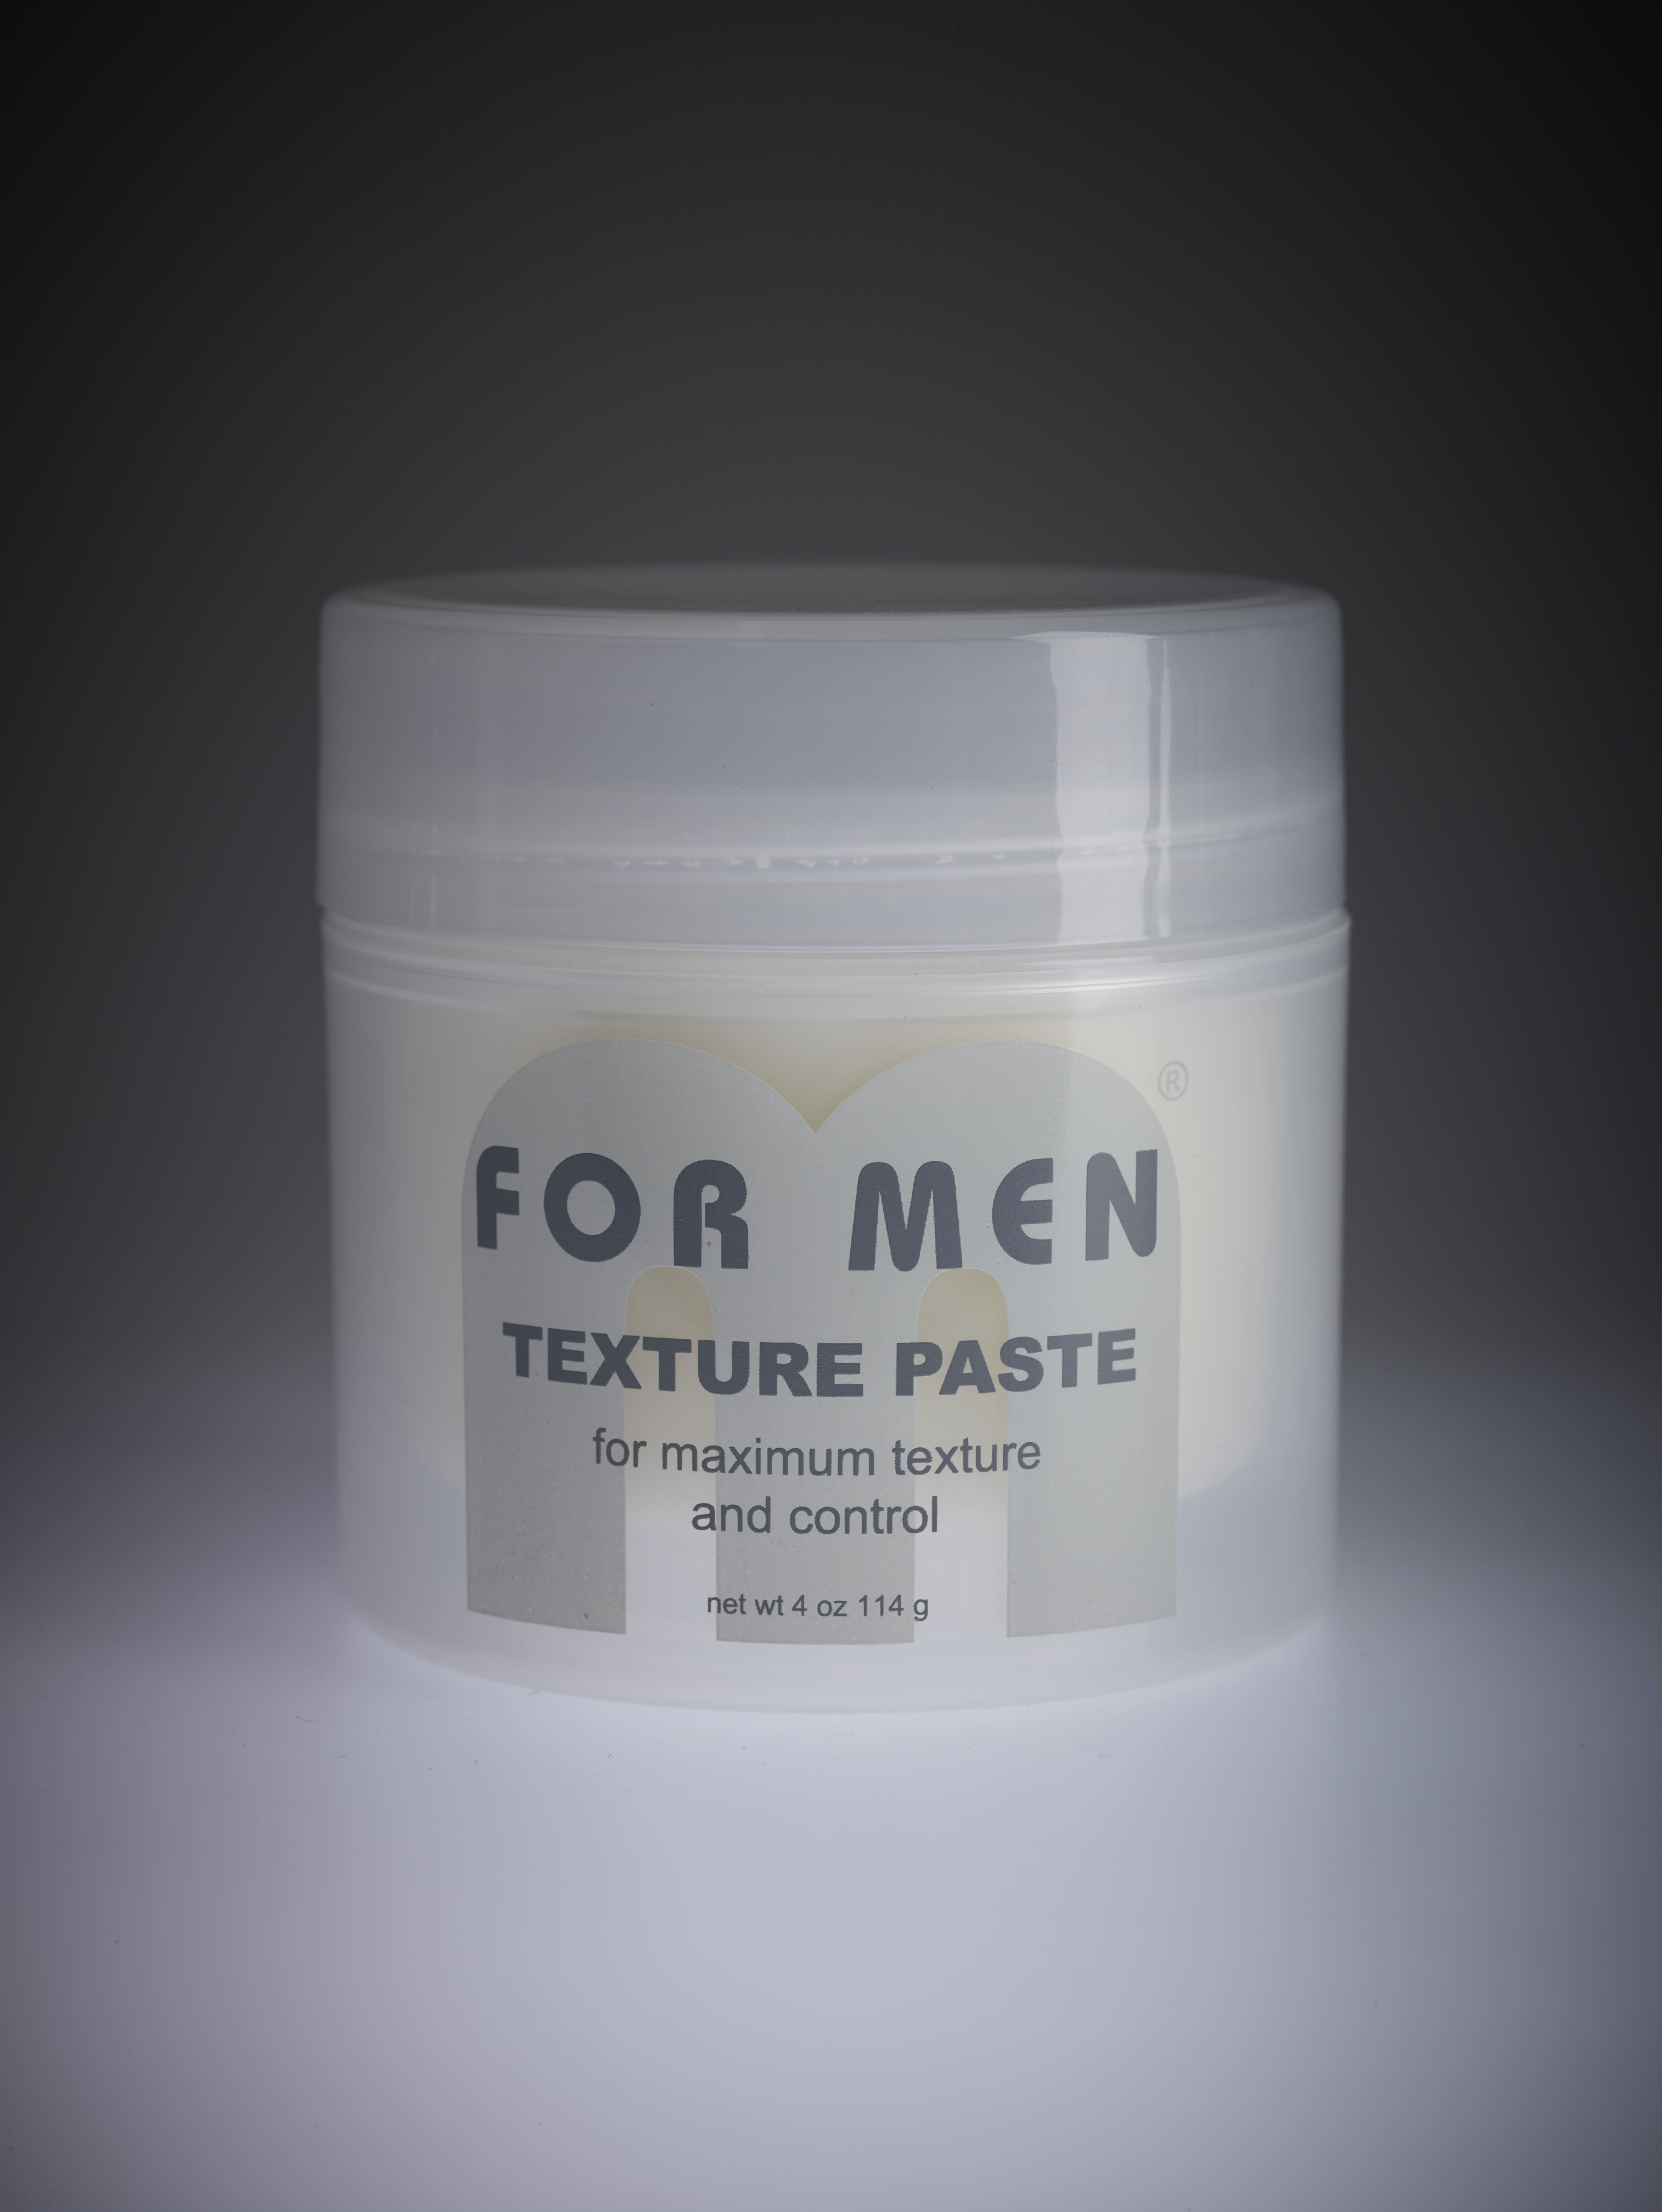 How to use texture paste by Krista. Texture Paste by m FOR MEN, the best hair paste for men.